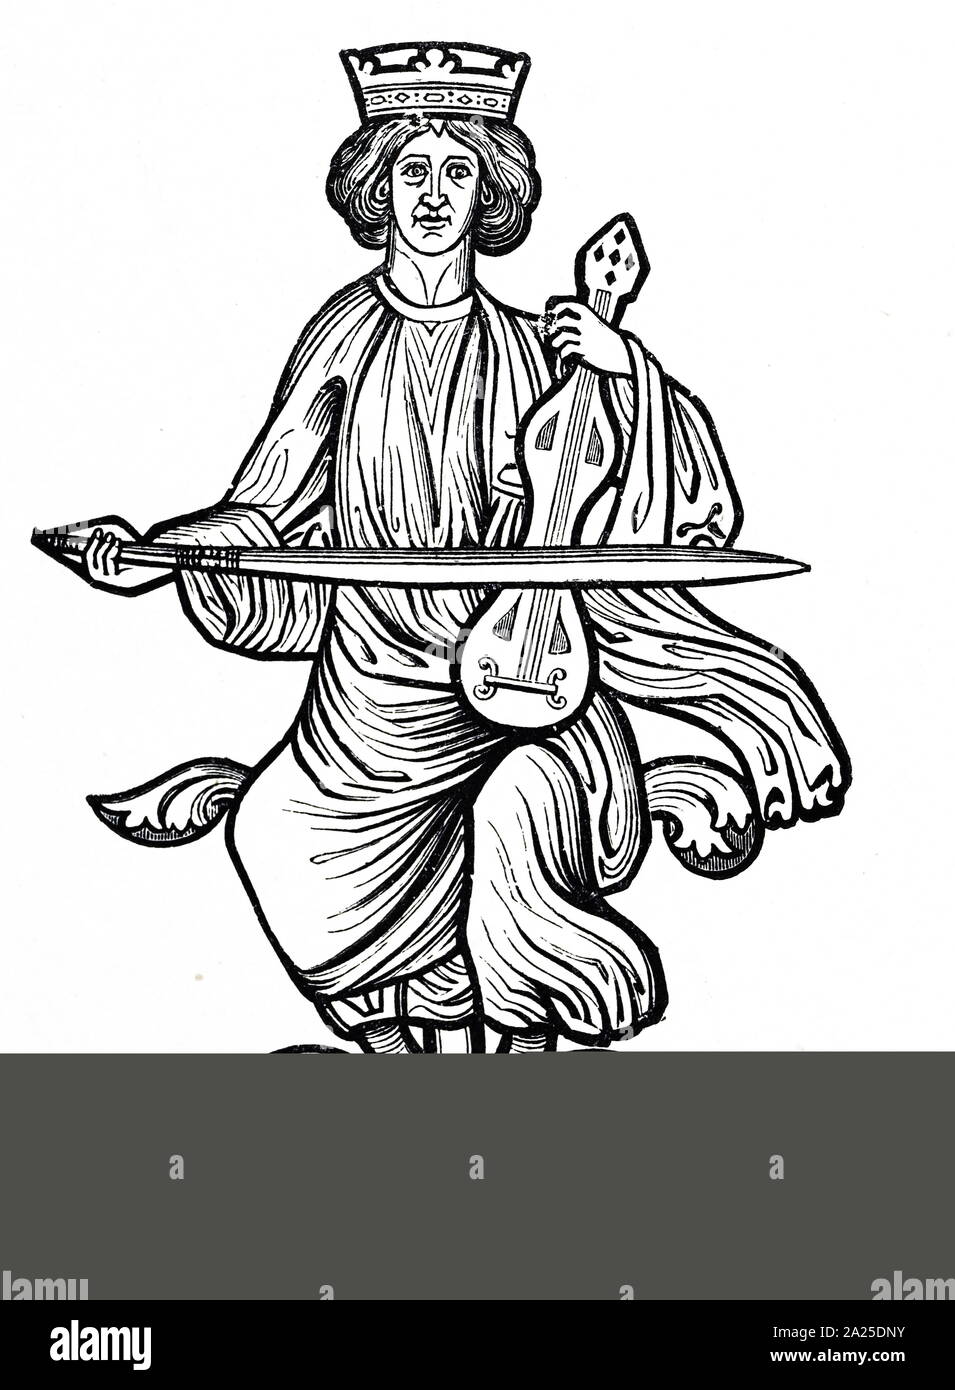 Woodblock engraving depicting King David shown playing a rote, a medieval stringed instrument. Engraving after detail in a 13th century window. Dated 19th century Stock Photo